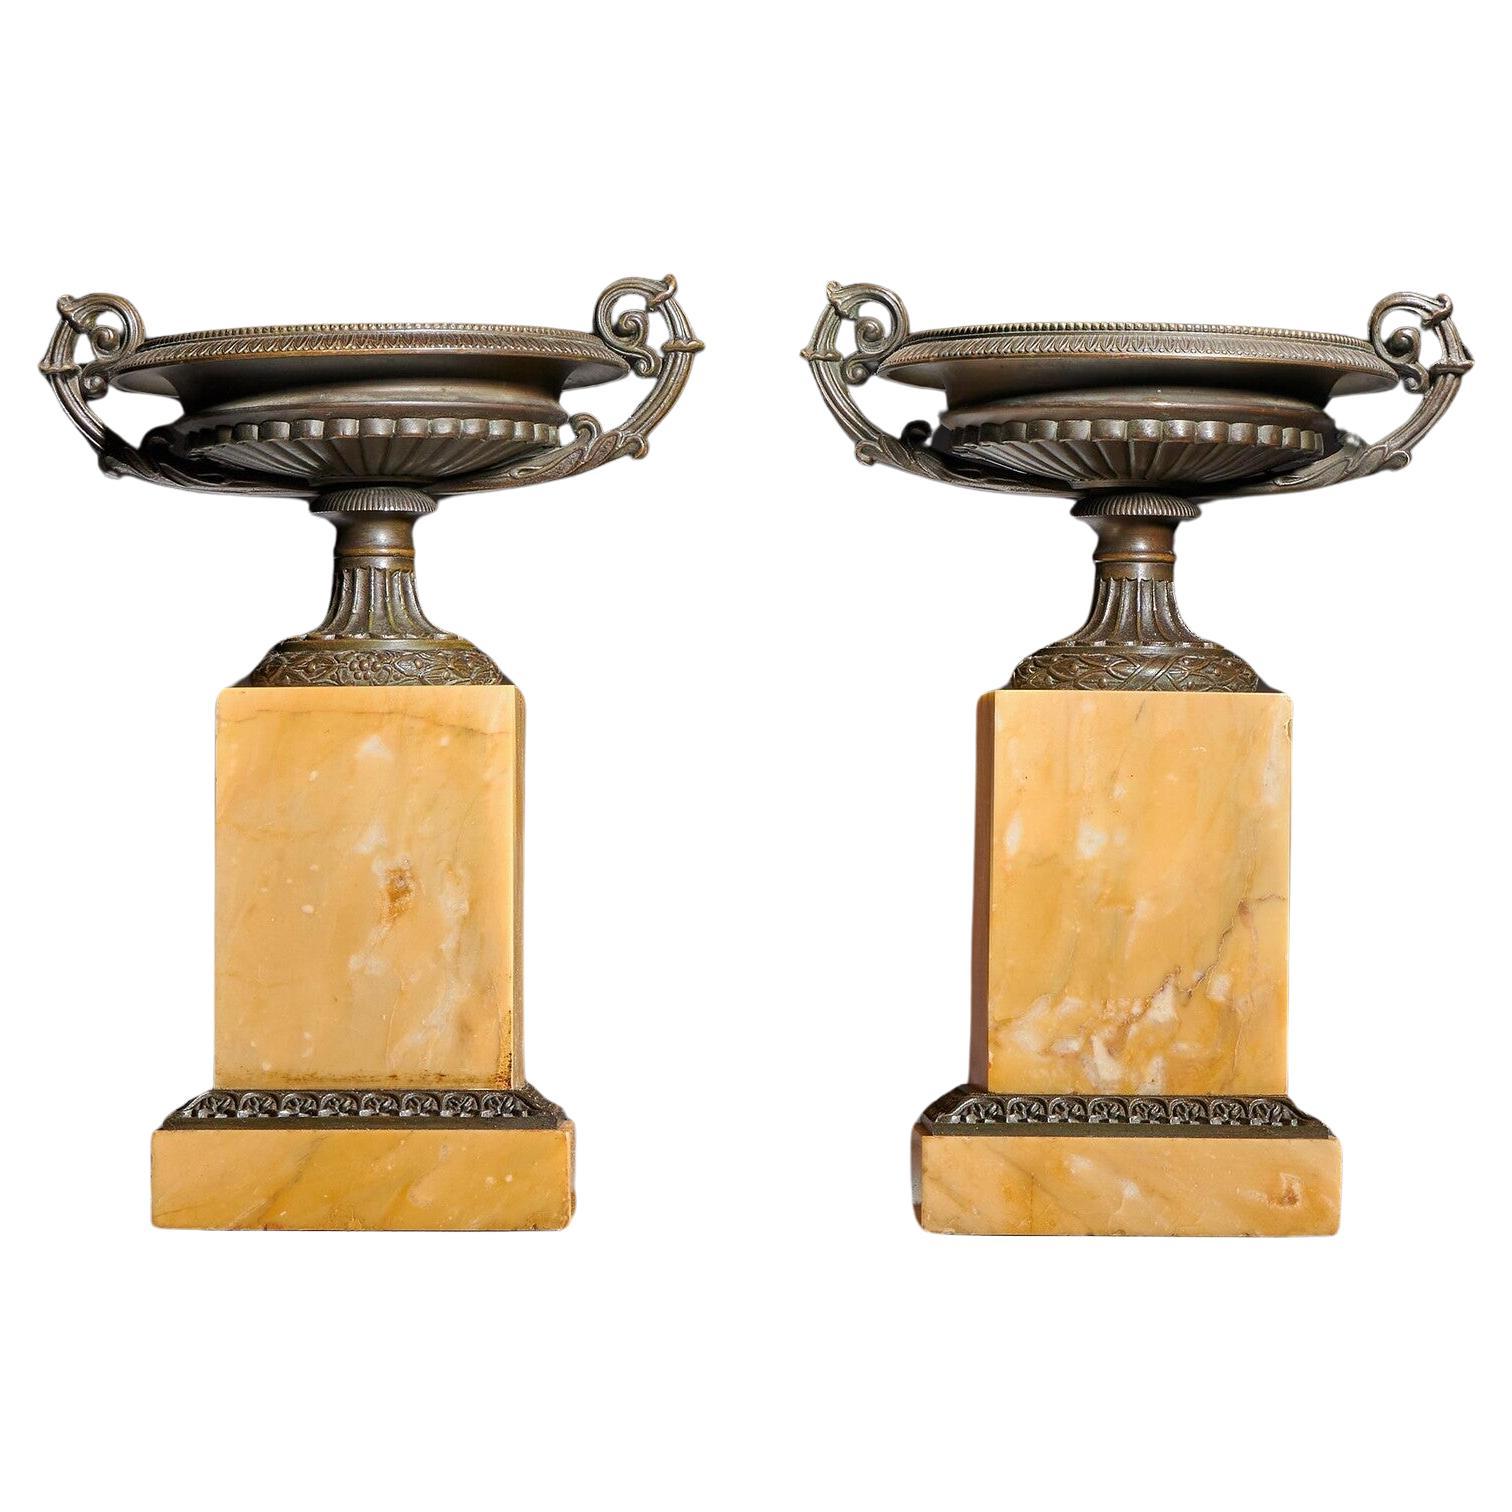 A Fine Pair of Early 19th Century French Grand Tour Bronze & Siena Marble Tazzas For Sale